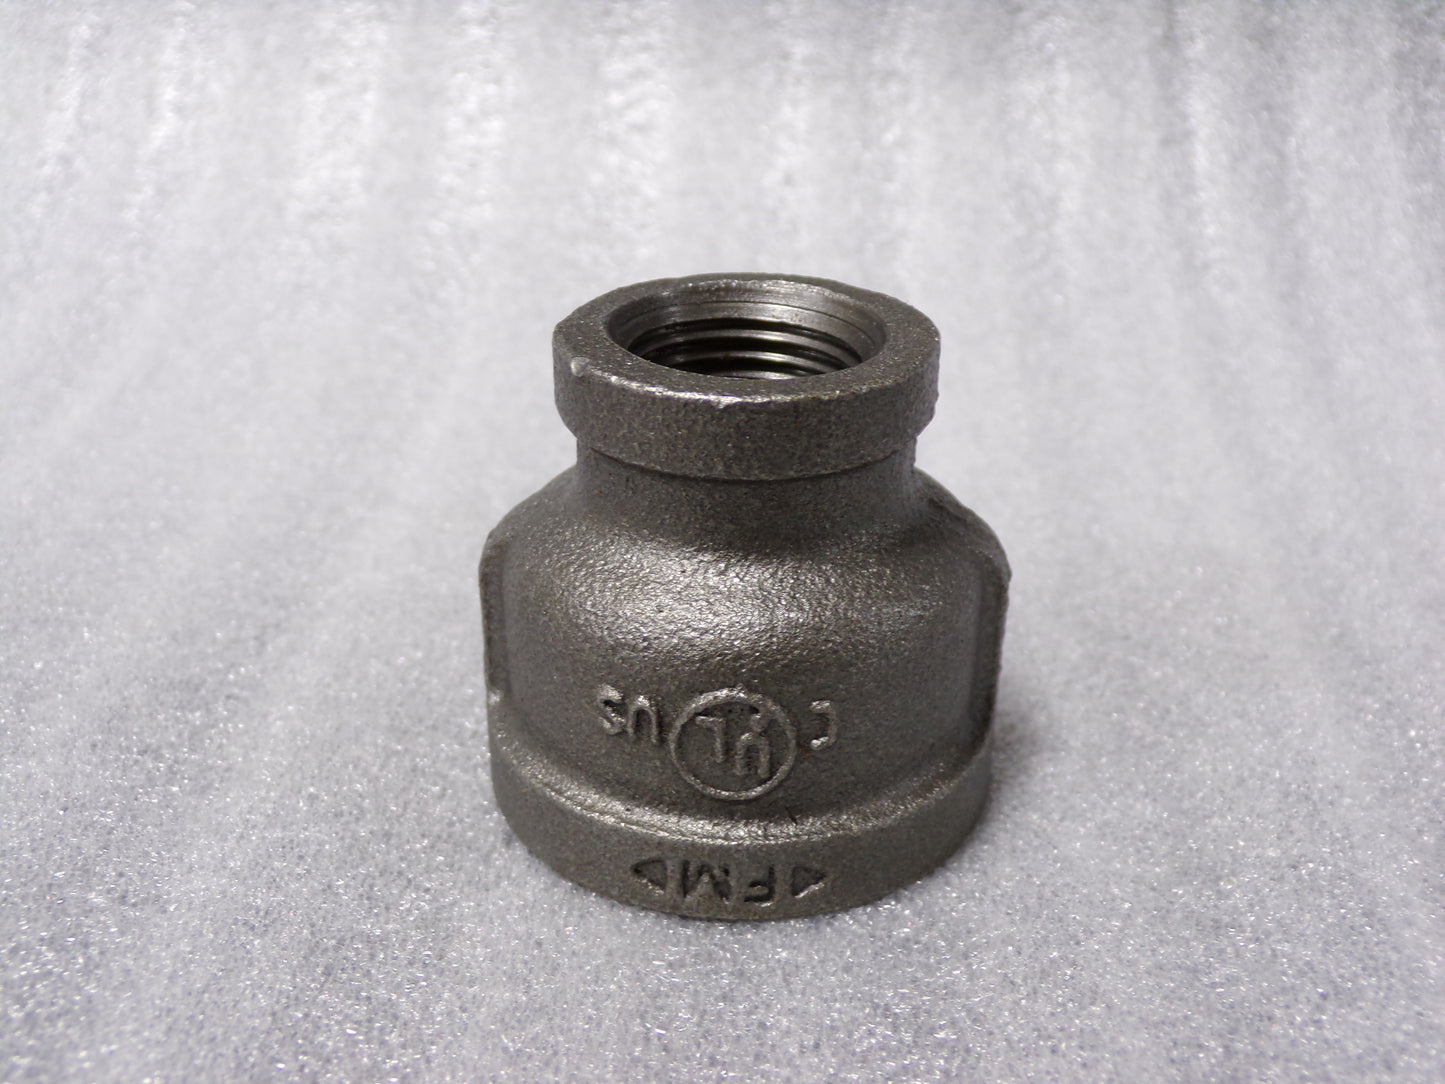 Reducer Coupling, FNPT, 1 in x 1/2 in Pipe Size - Pipe Fitting (CR00207-BT27)